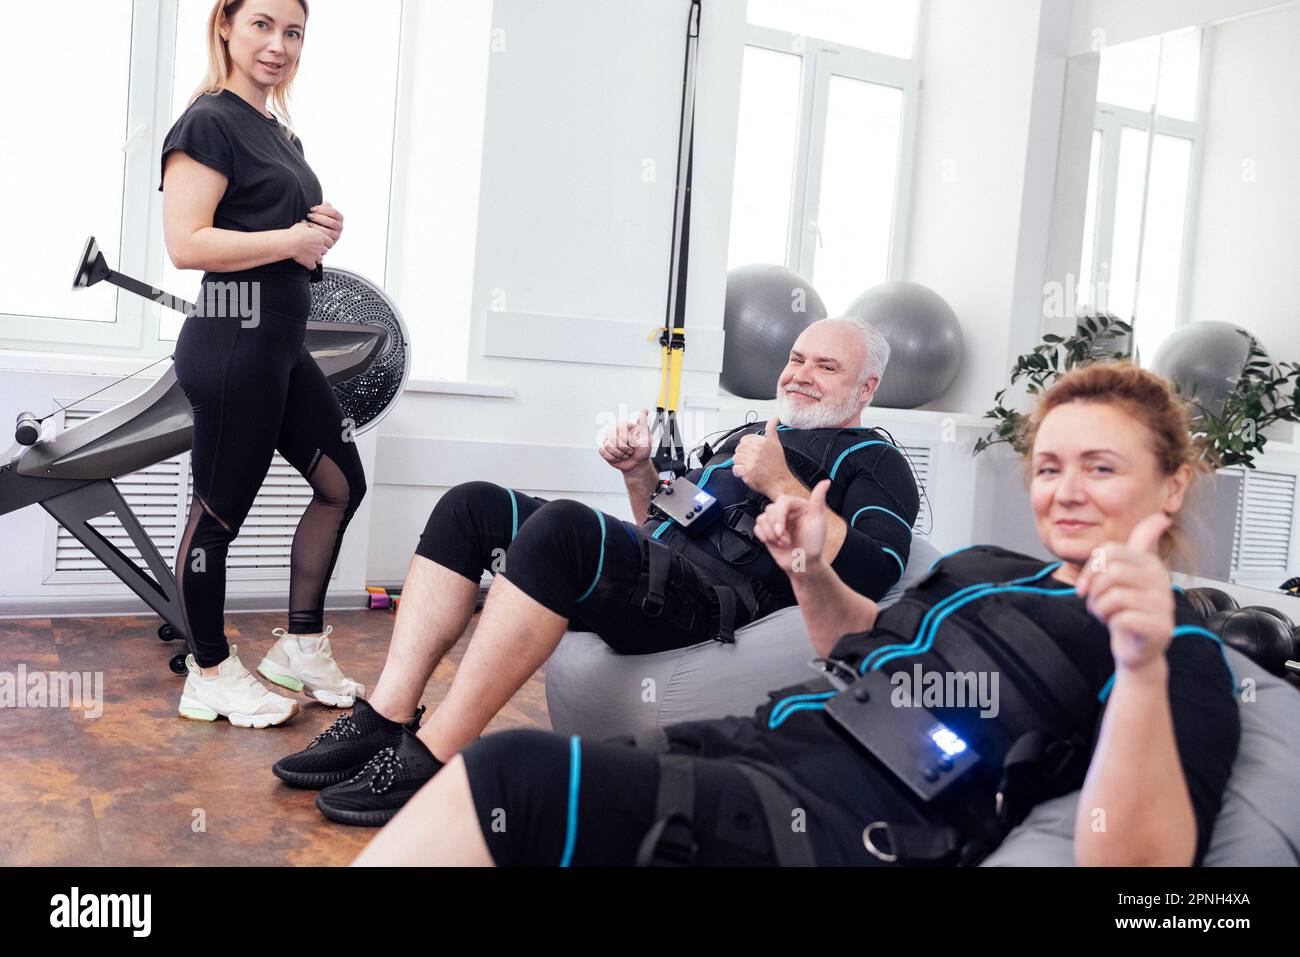 https://c8.alamy.com/comp/2PNH4XA/happy-aged-couple-in-ems-suits-sits-on-massage-chairs-after-electrical-muscle-stimulation-workout-with-personal-coach-in-gym-or-fitness-club-smiling-2PNH4XA.jpg